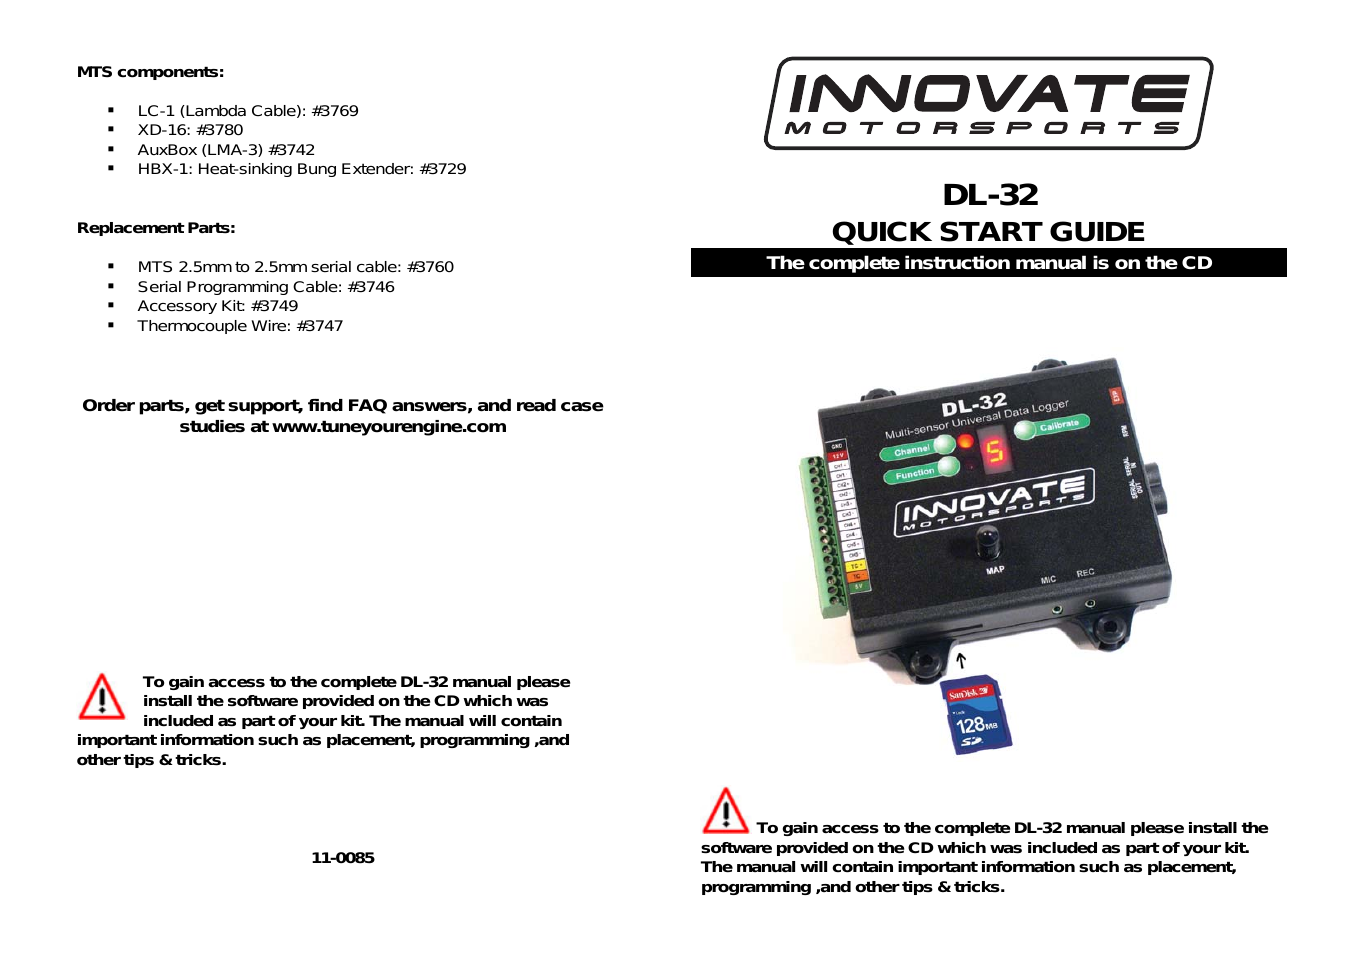 DL-32 Quick Start Guide